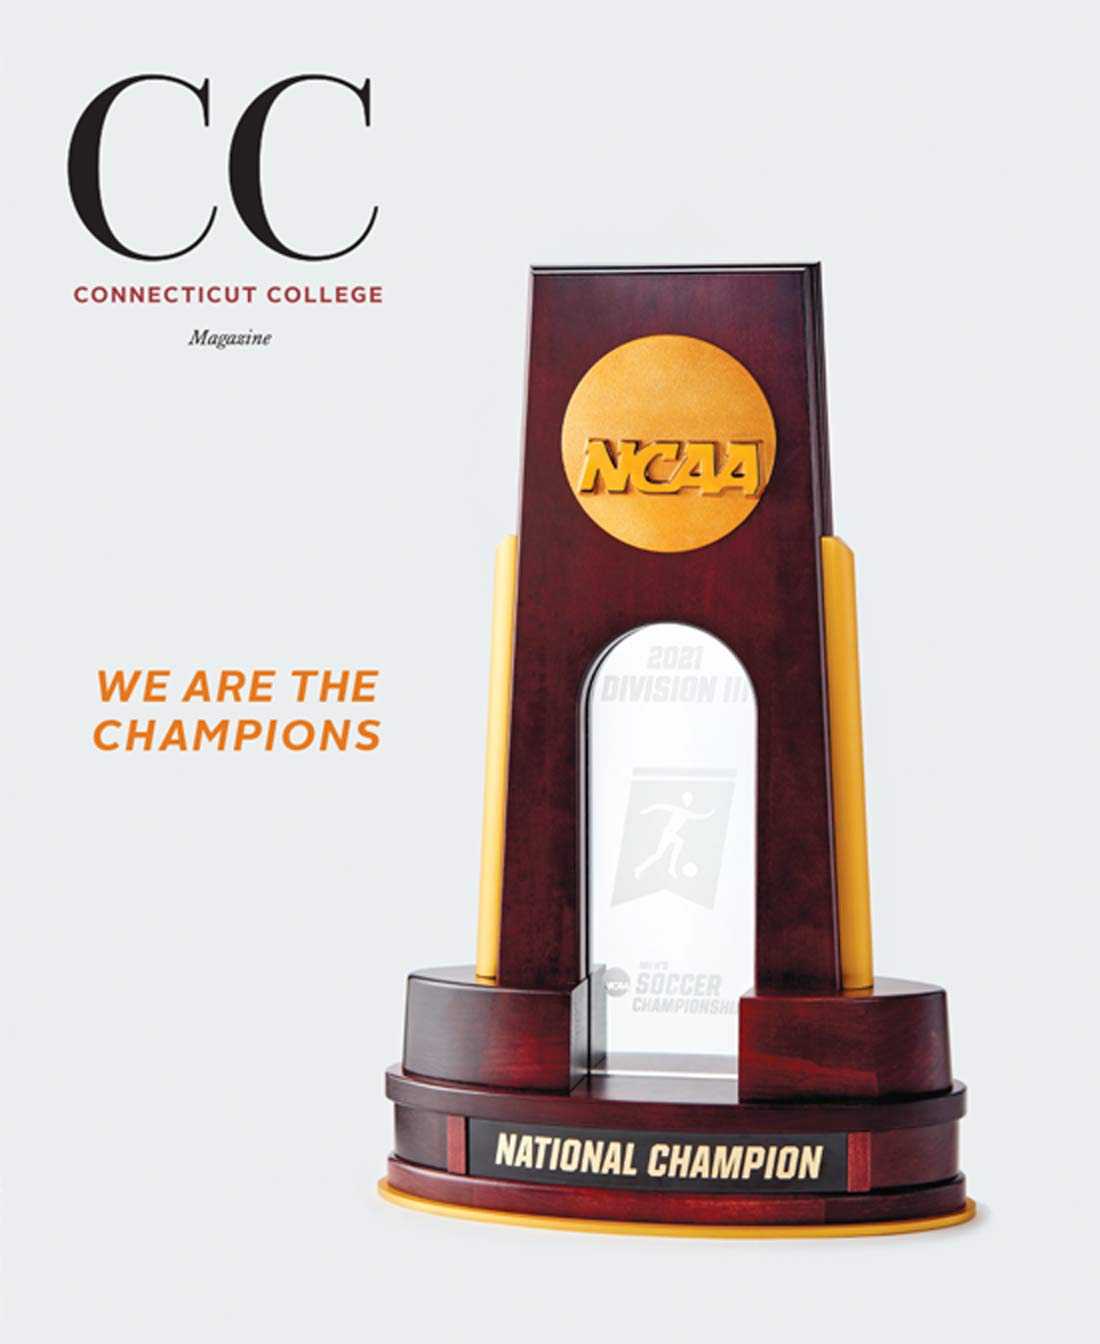 Image of NCAA men's soccer trophy on cover of CC Magazine